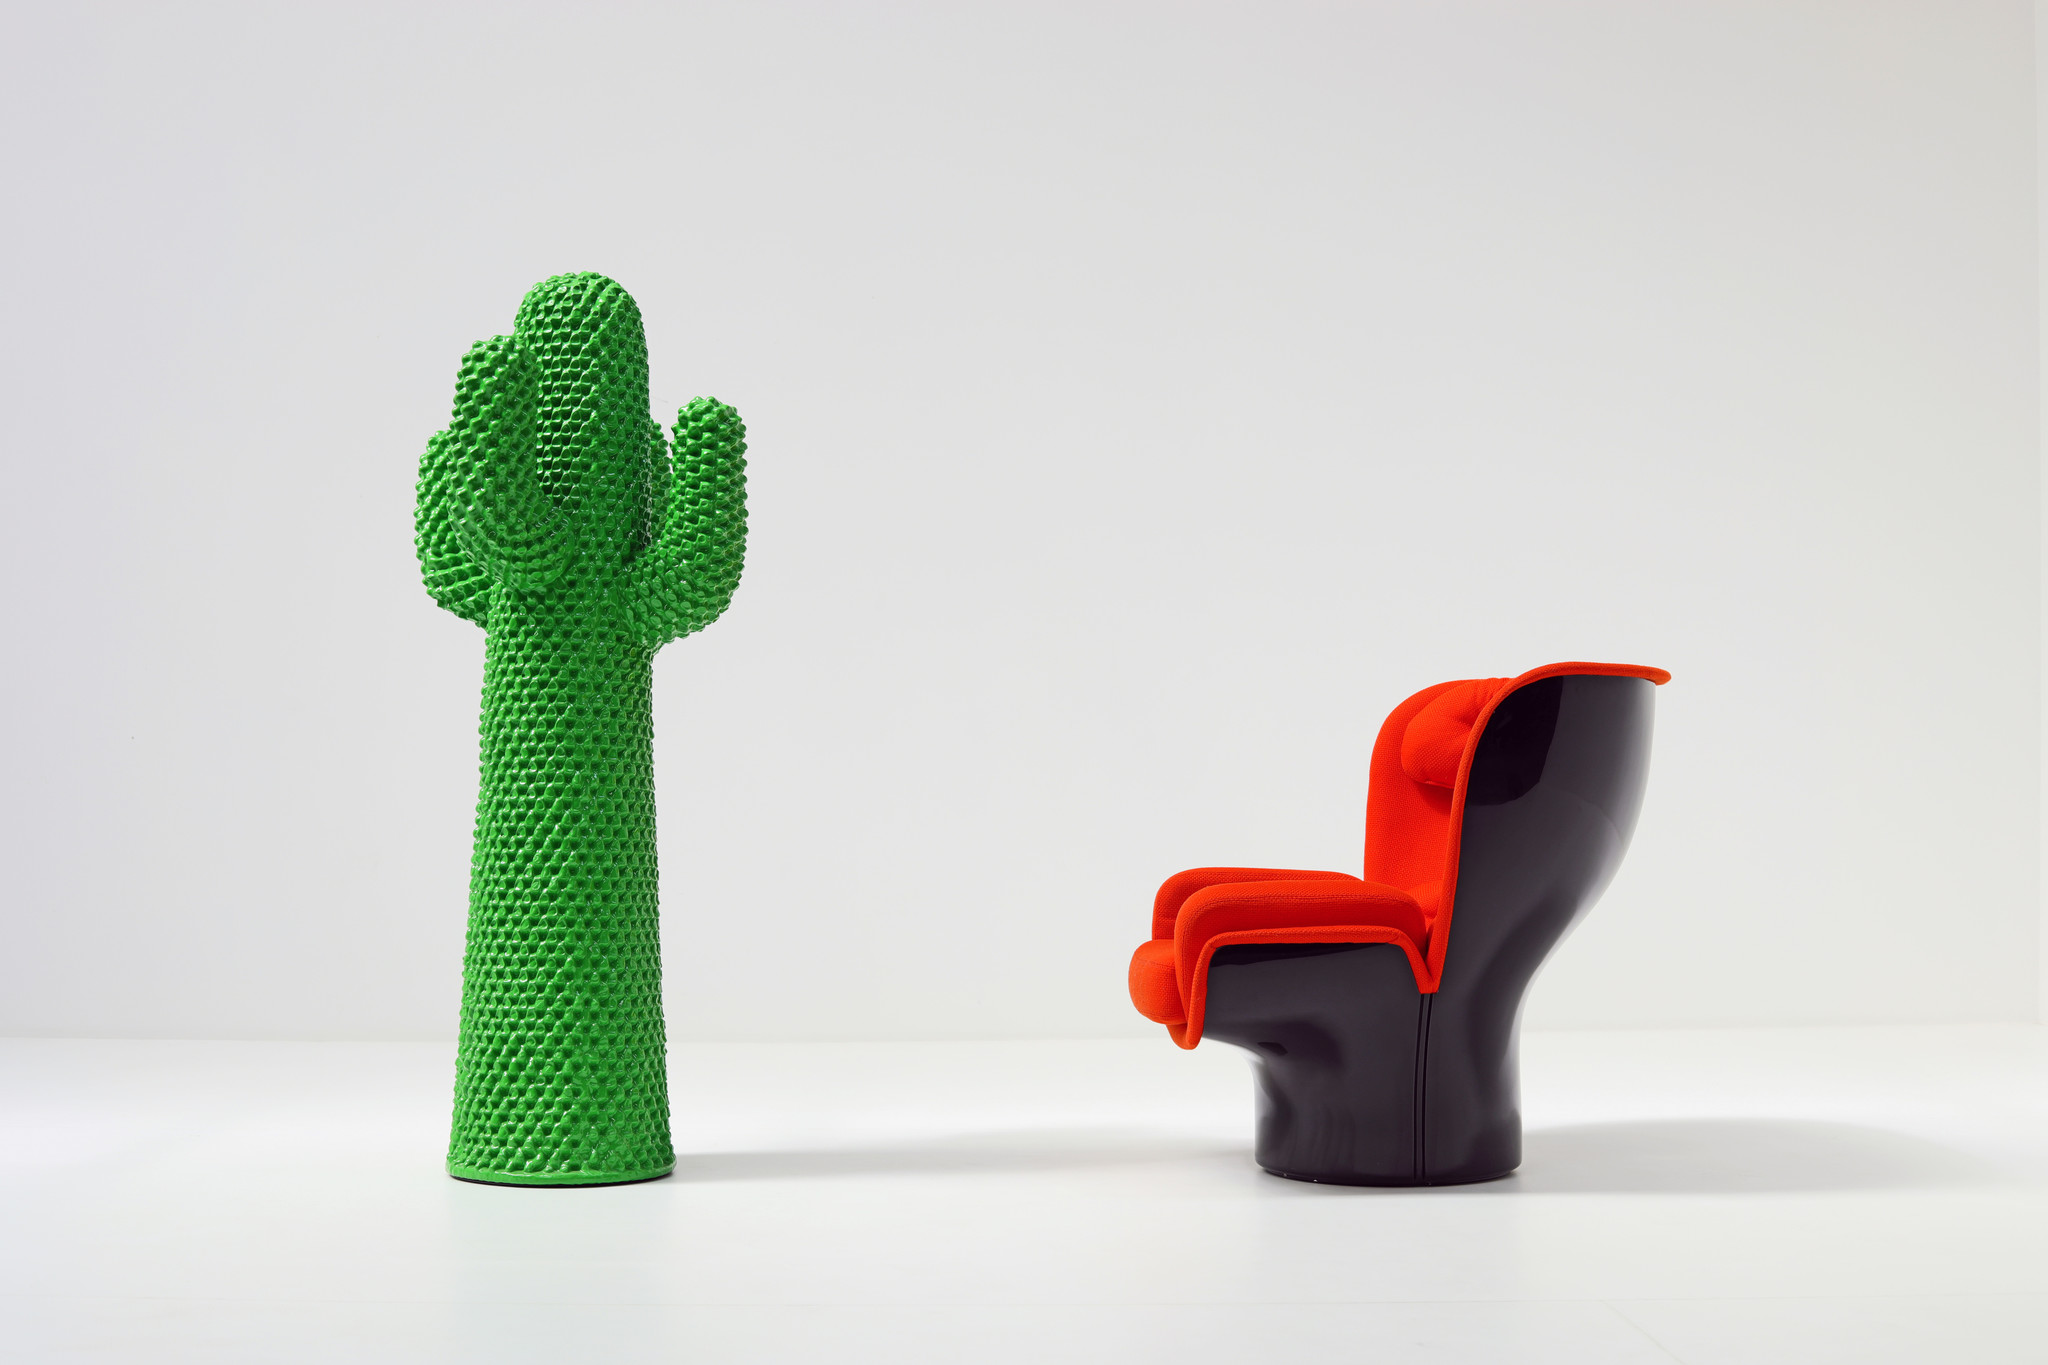 GUFRAM "Another Green" CACTUS BY GUIDO DROCCO AND FRANCO MELLO, 1986